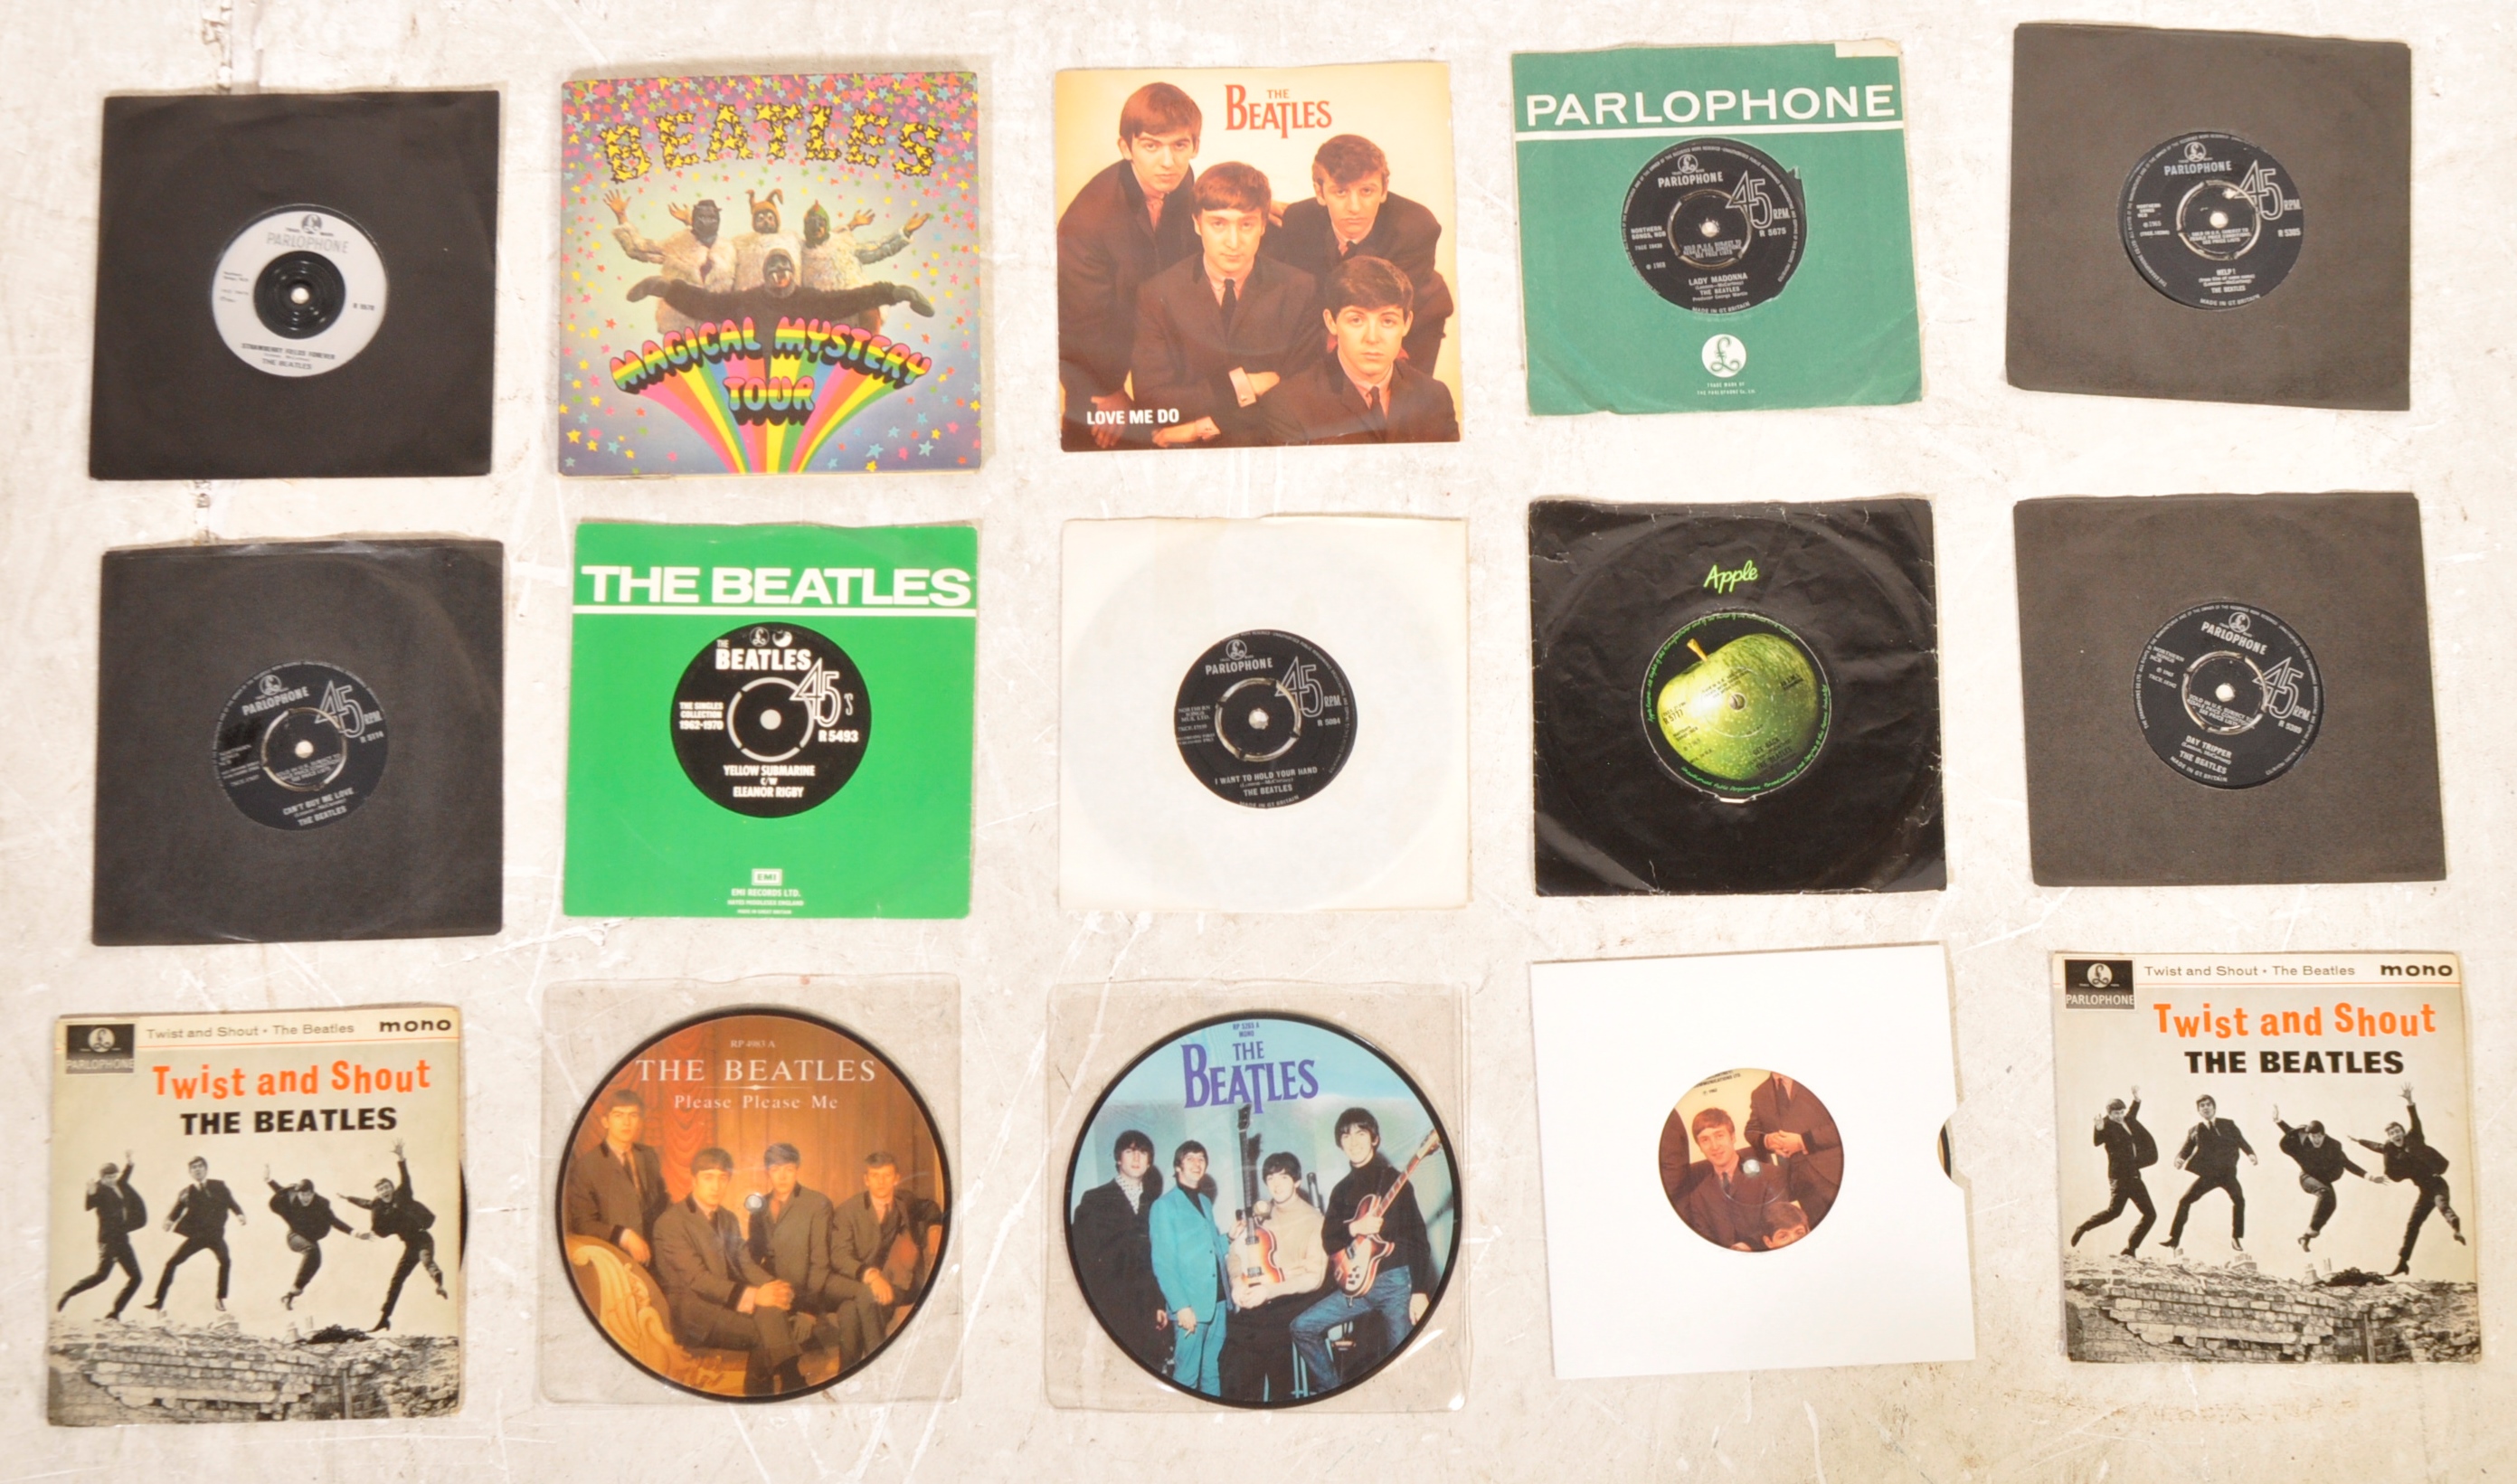 THE BEATLES - SLECTION OF 45RPM 7" VINYL SINGLES - Image 2 of 5